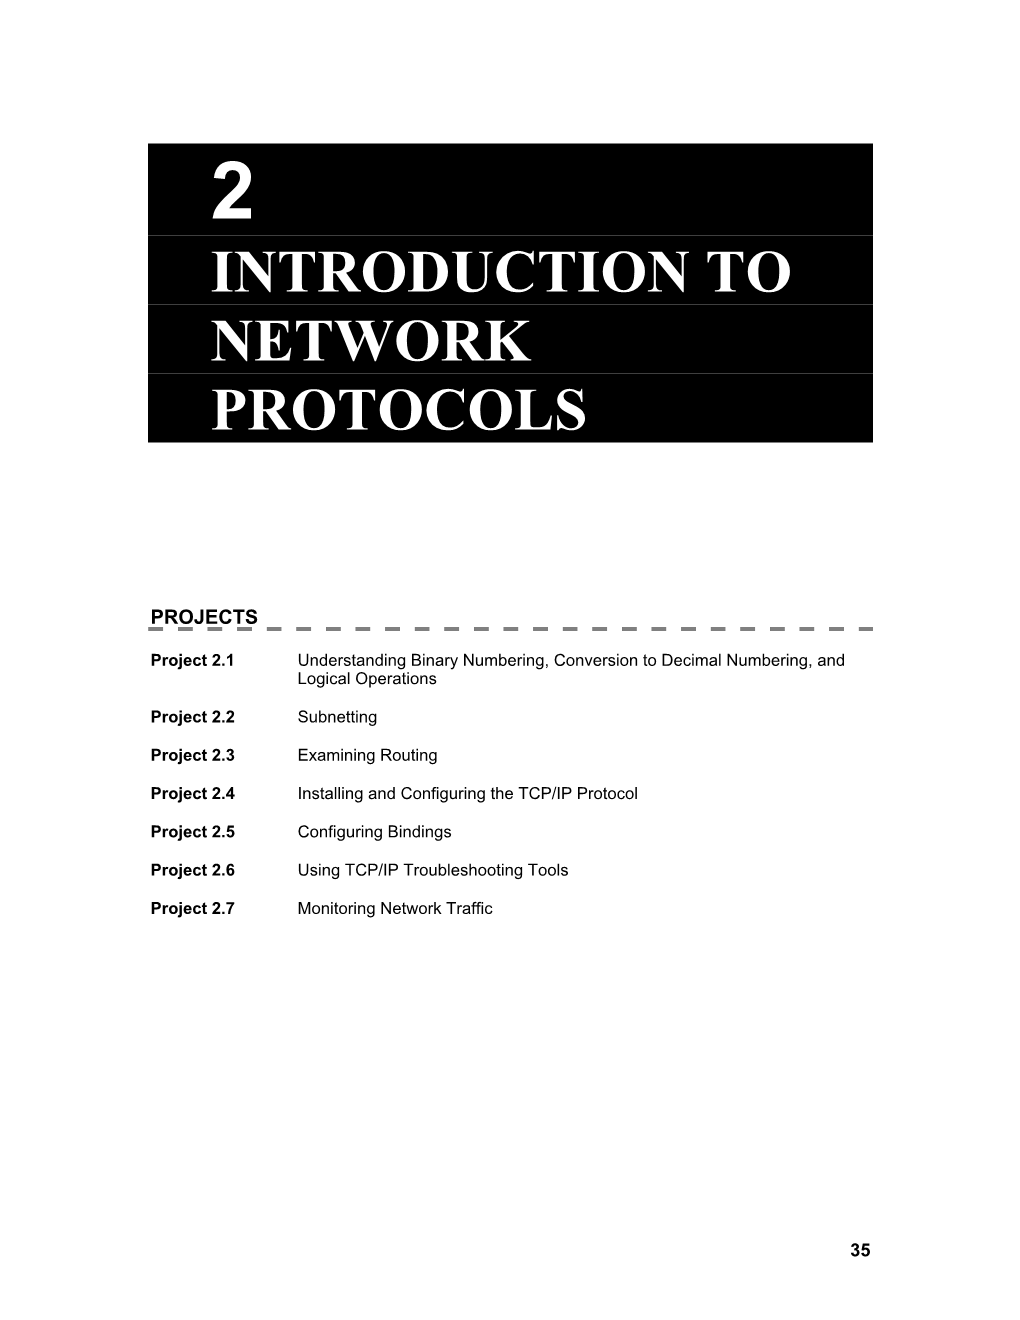 Introduction to Network Protocols